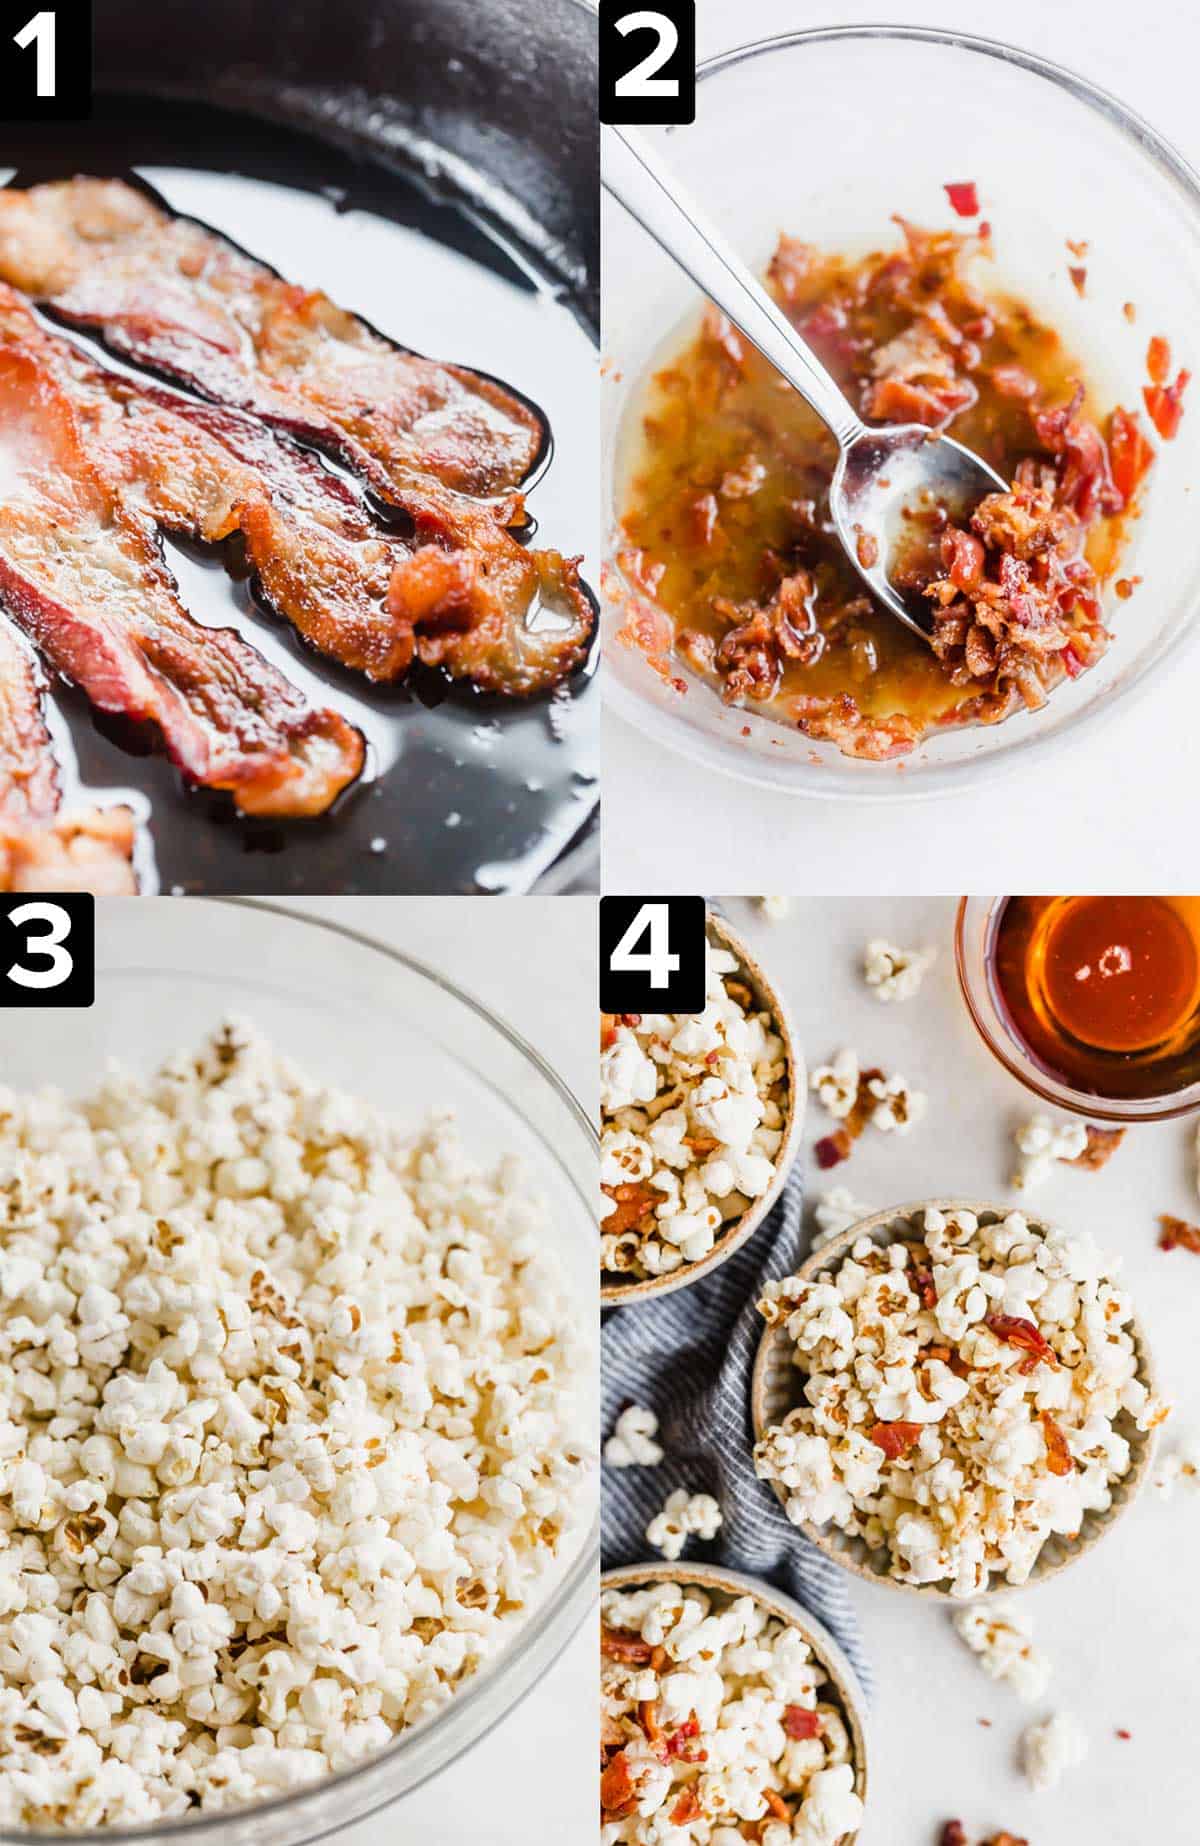 Top left image: bacon cooking in a black skillet. Top right image: bacon crumbled in a bowl mixed with maple syrup. Bottom left: popcorn in a glass bowl. Bottom right: maple bacon popcorn in bowls.